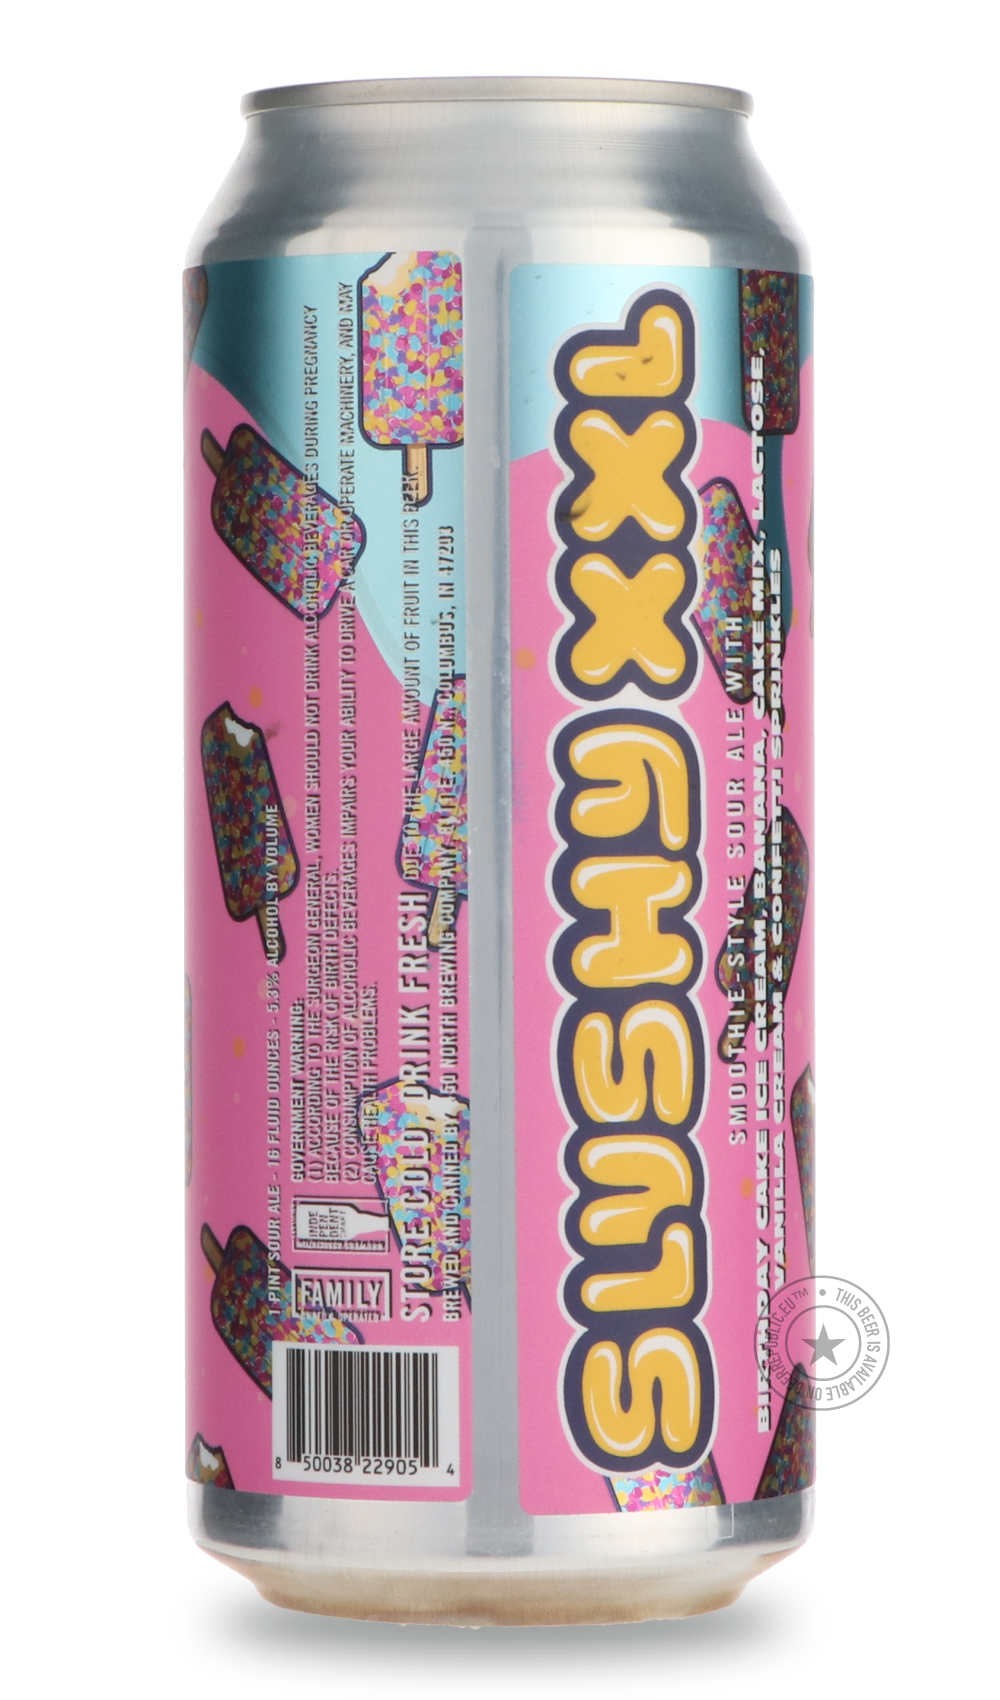 -450 North- Slushy XXL Birthday Cake Crunch Bar-Sour / Wild & Fruity- Only @ Beer Republic - The best online beer store for American & Canadian craft beer - Buy beer online from the USA and Canada - Bier online kopen - Amerikaans bier kopen - Craft beer store - Craft beer kopen - Amerikanisch bier kaufen - Bier online kaufen - Acheter biere online - IPA - Stout - Porter - New England IPA - Hazy IPA - Imperial Stout - Barrel Aged - Barrel Aged Imperial Stout - Brown - Dark beer - Blond - Blonde - Pilsner - L